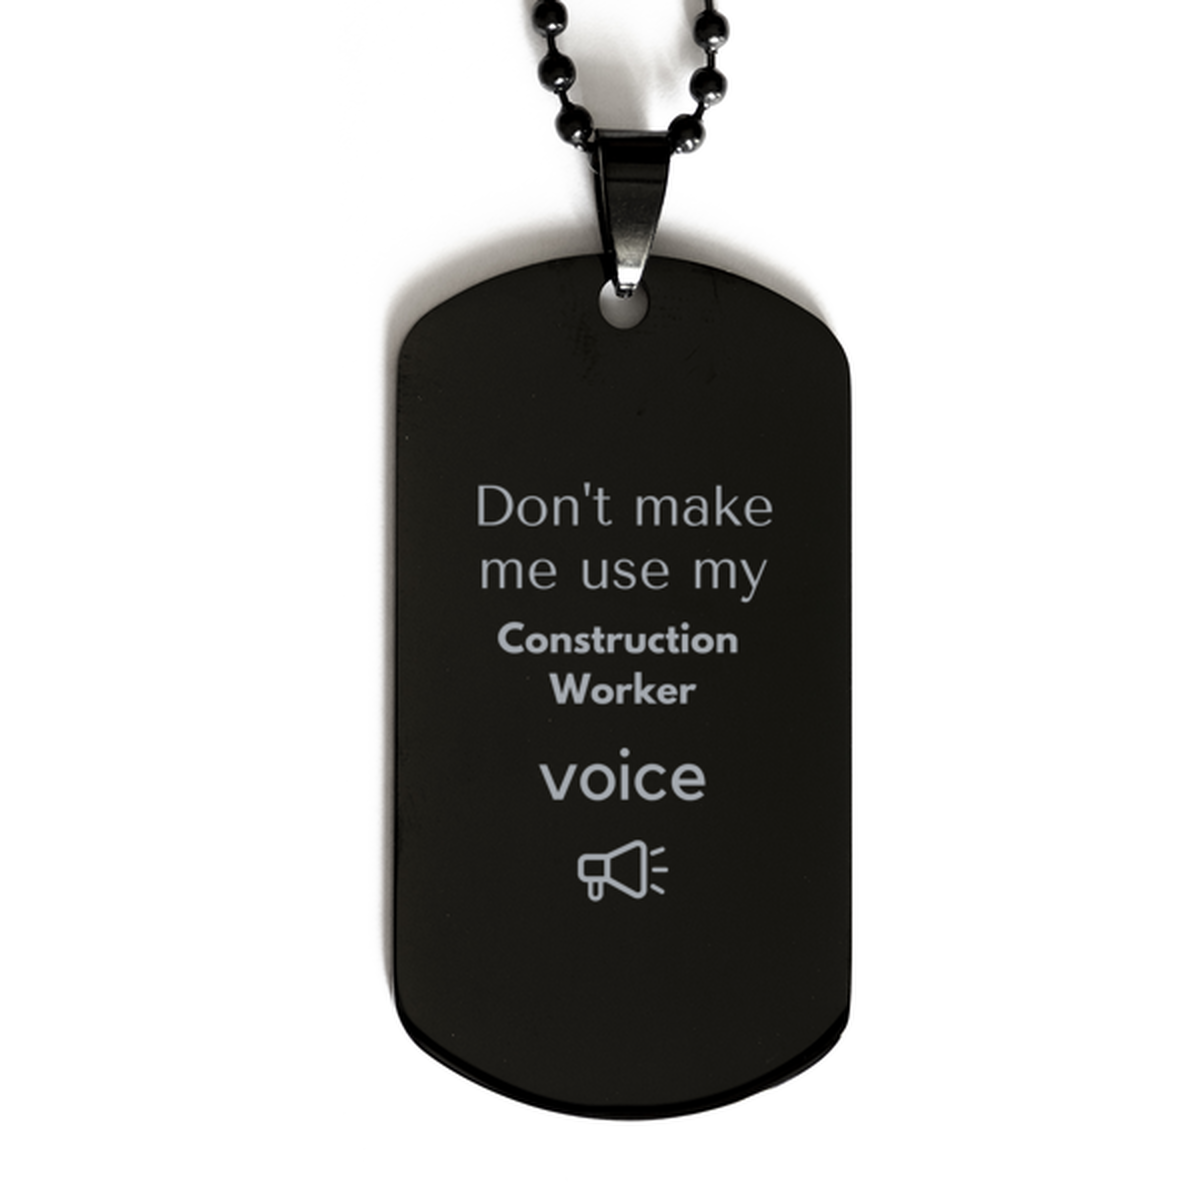 Don't make me use my Construction Worker voice, Sarcasm Construction Worker Gifts, Christmas Construction Worker Black Dog Tag Birthday Unique Gifts For Construction Worker Coworkers, Men, Women, Colleague, Friends